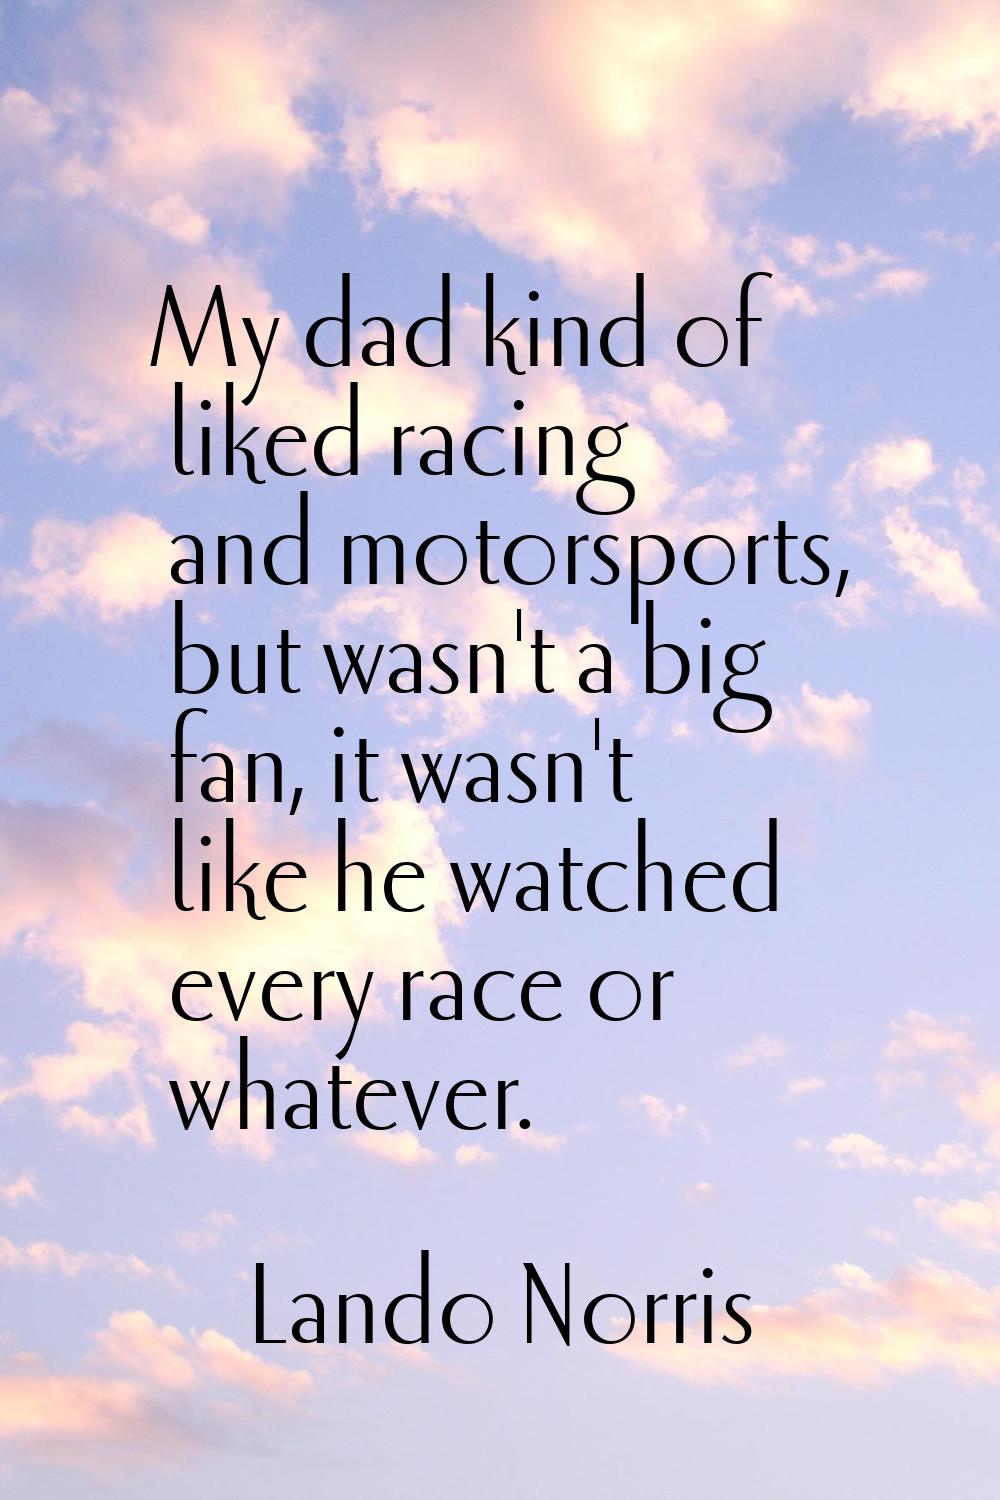 My dad kind of liked racing and motorsports, but wasn't a big fan, it wasn't like he watched every 